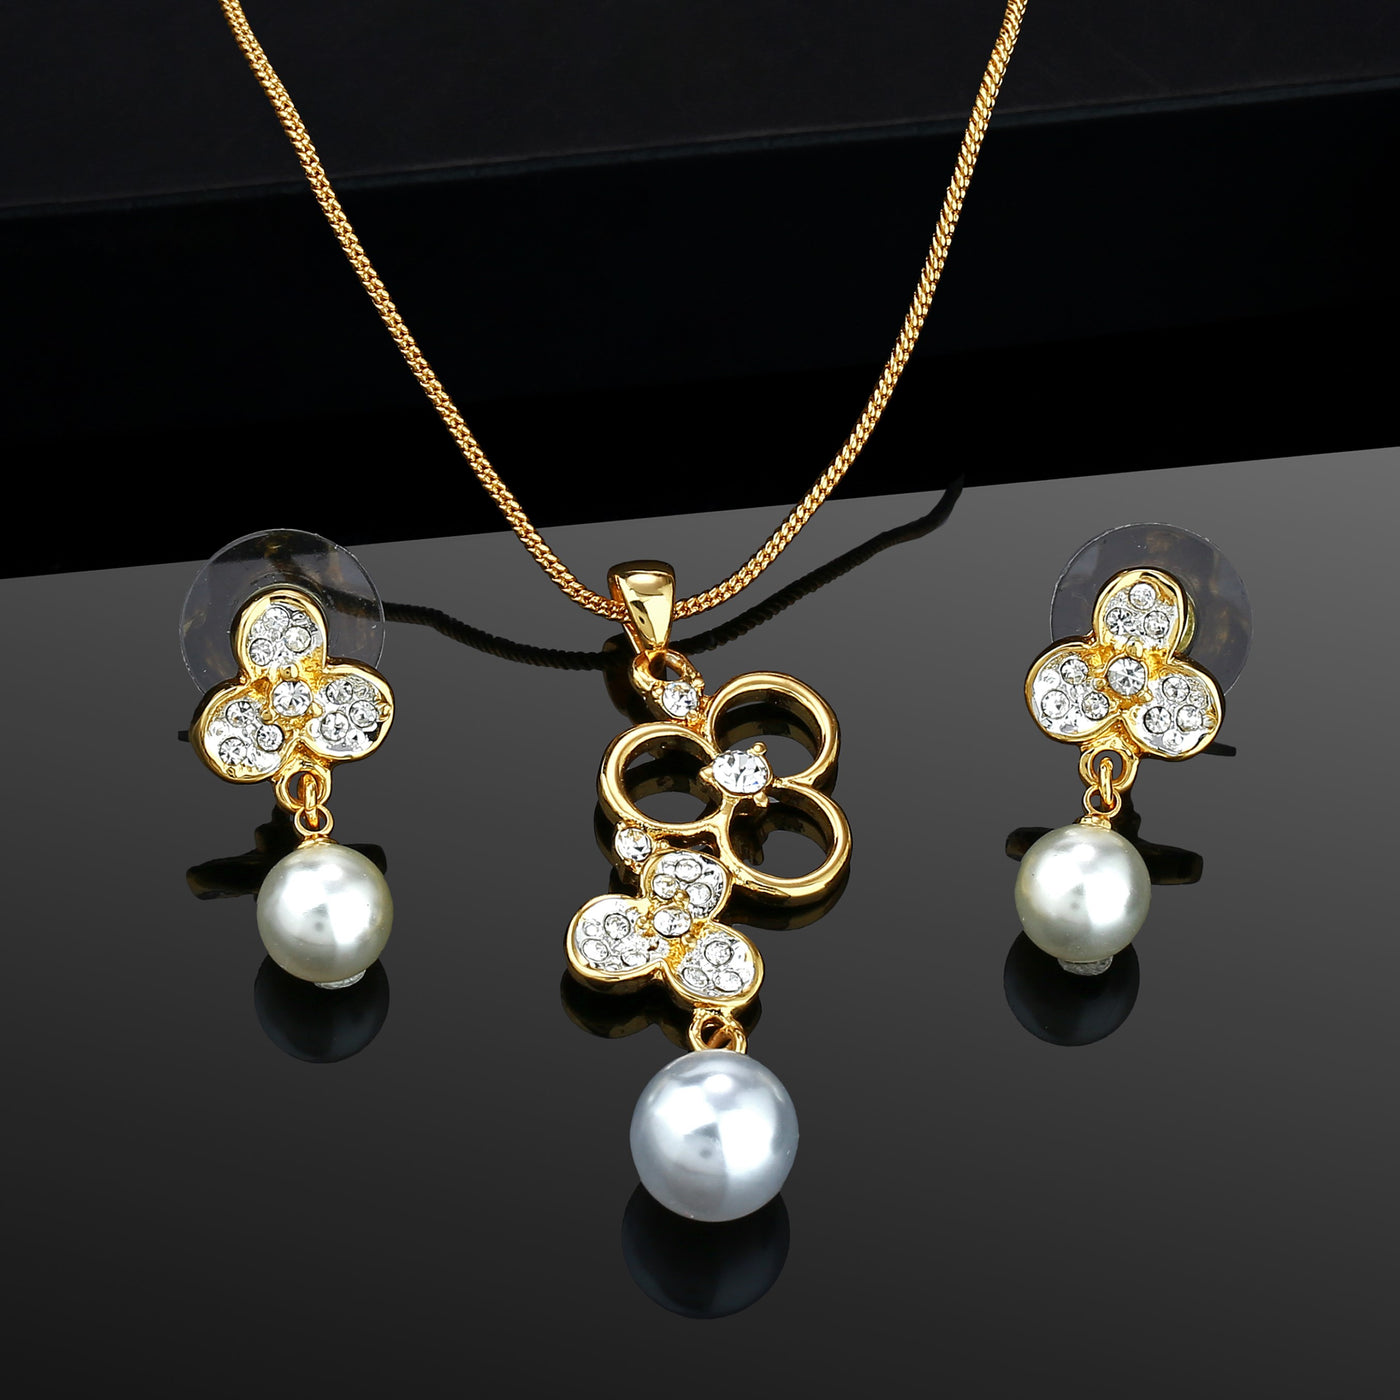 Estele 24 KT Gold Plated Pendant Set with Austrian Crystals and Pearl Drop for Women / Girls